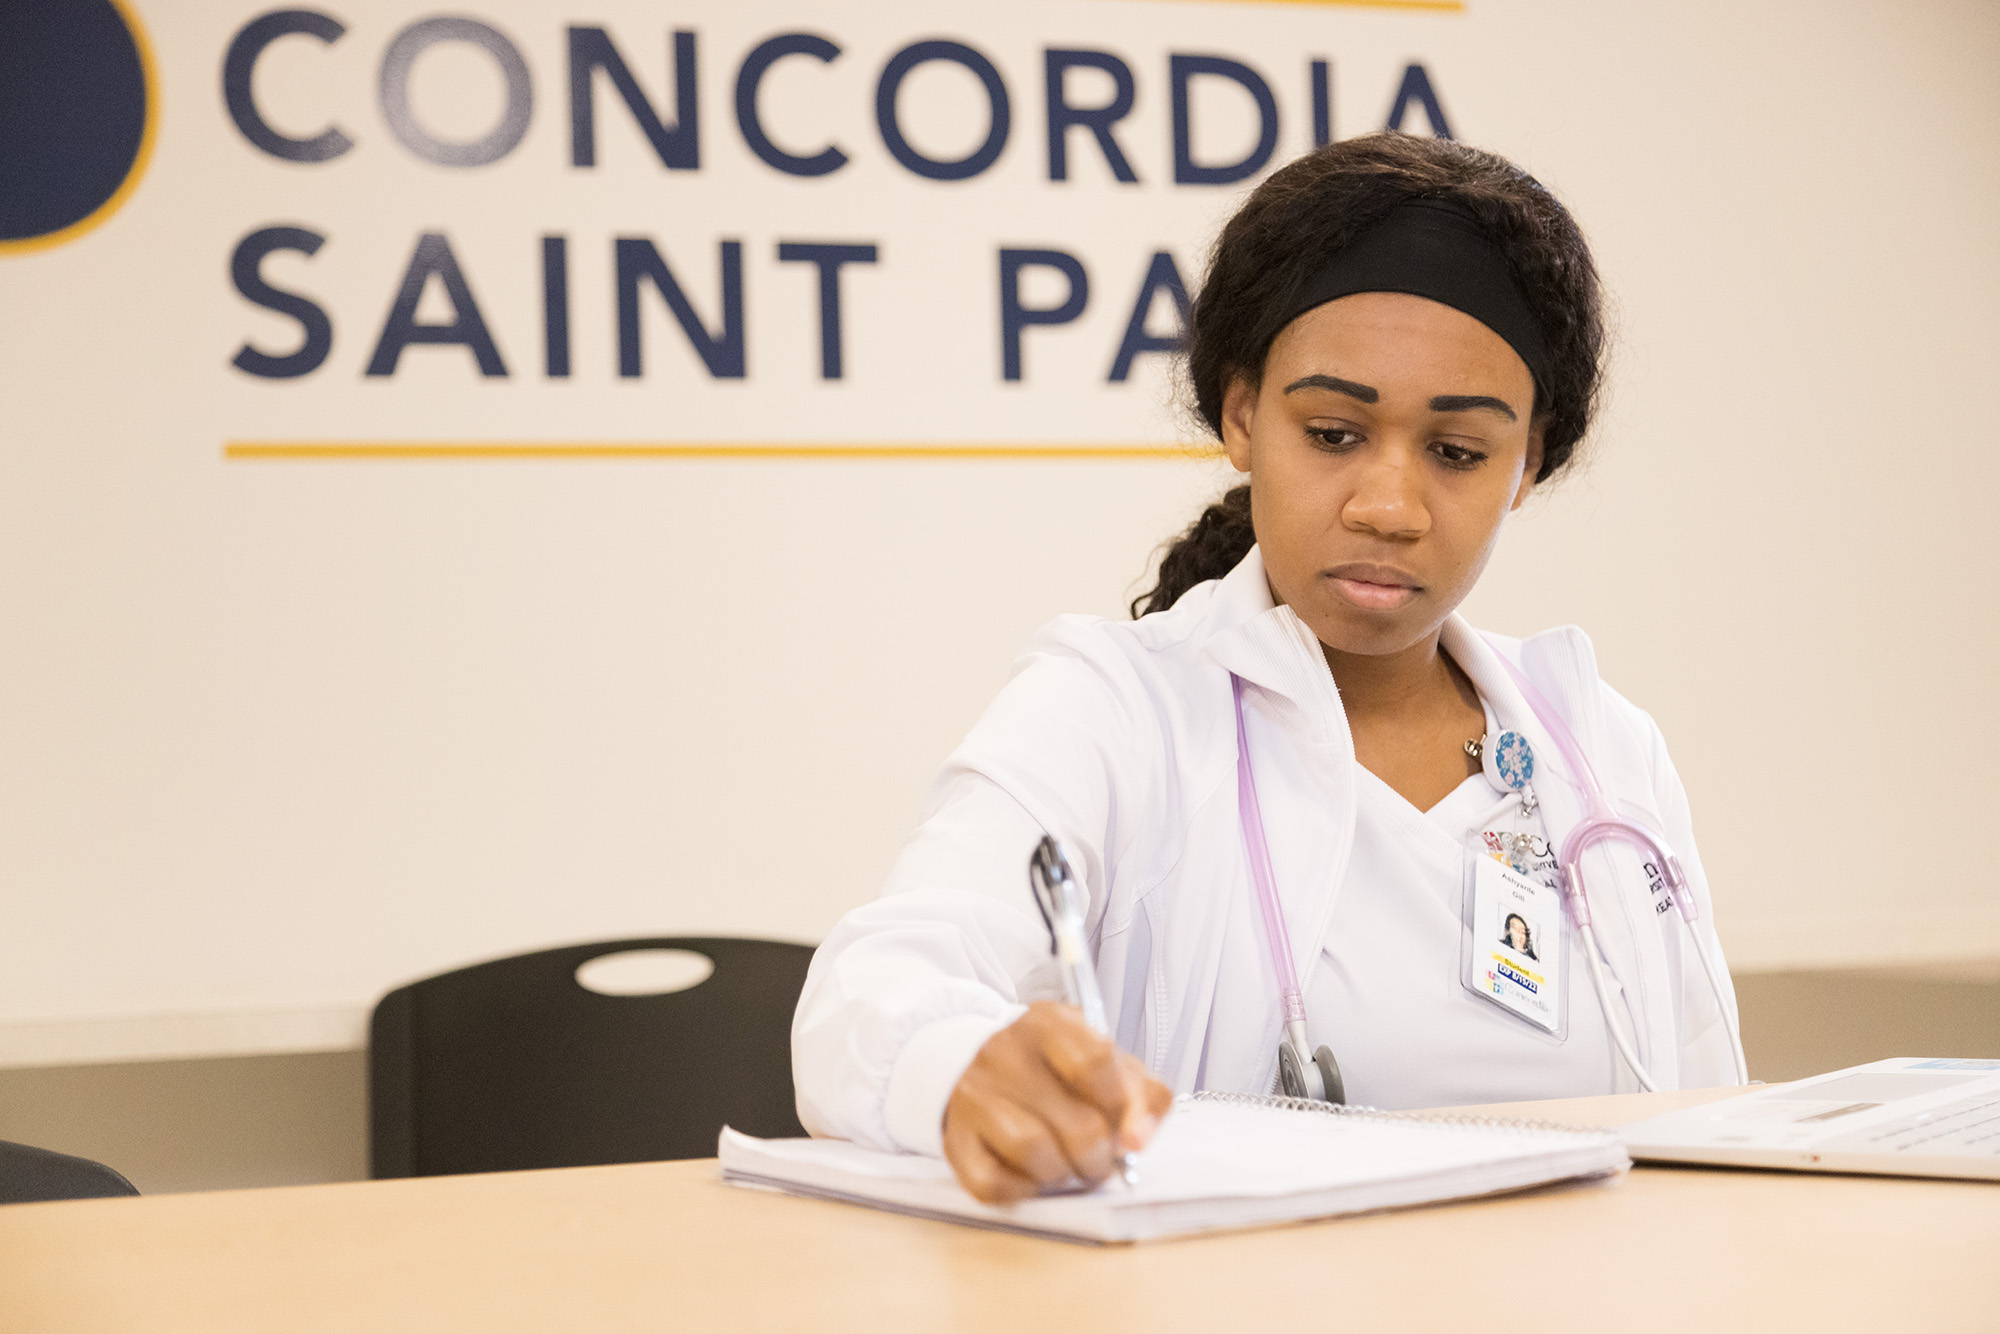 Nursing student wearing white scrubs and a pink stethoscrope sitting at a table writing in a notebook in front of a tan wall with a blue Concordia University, St. Paul logo on it.